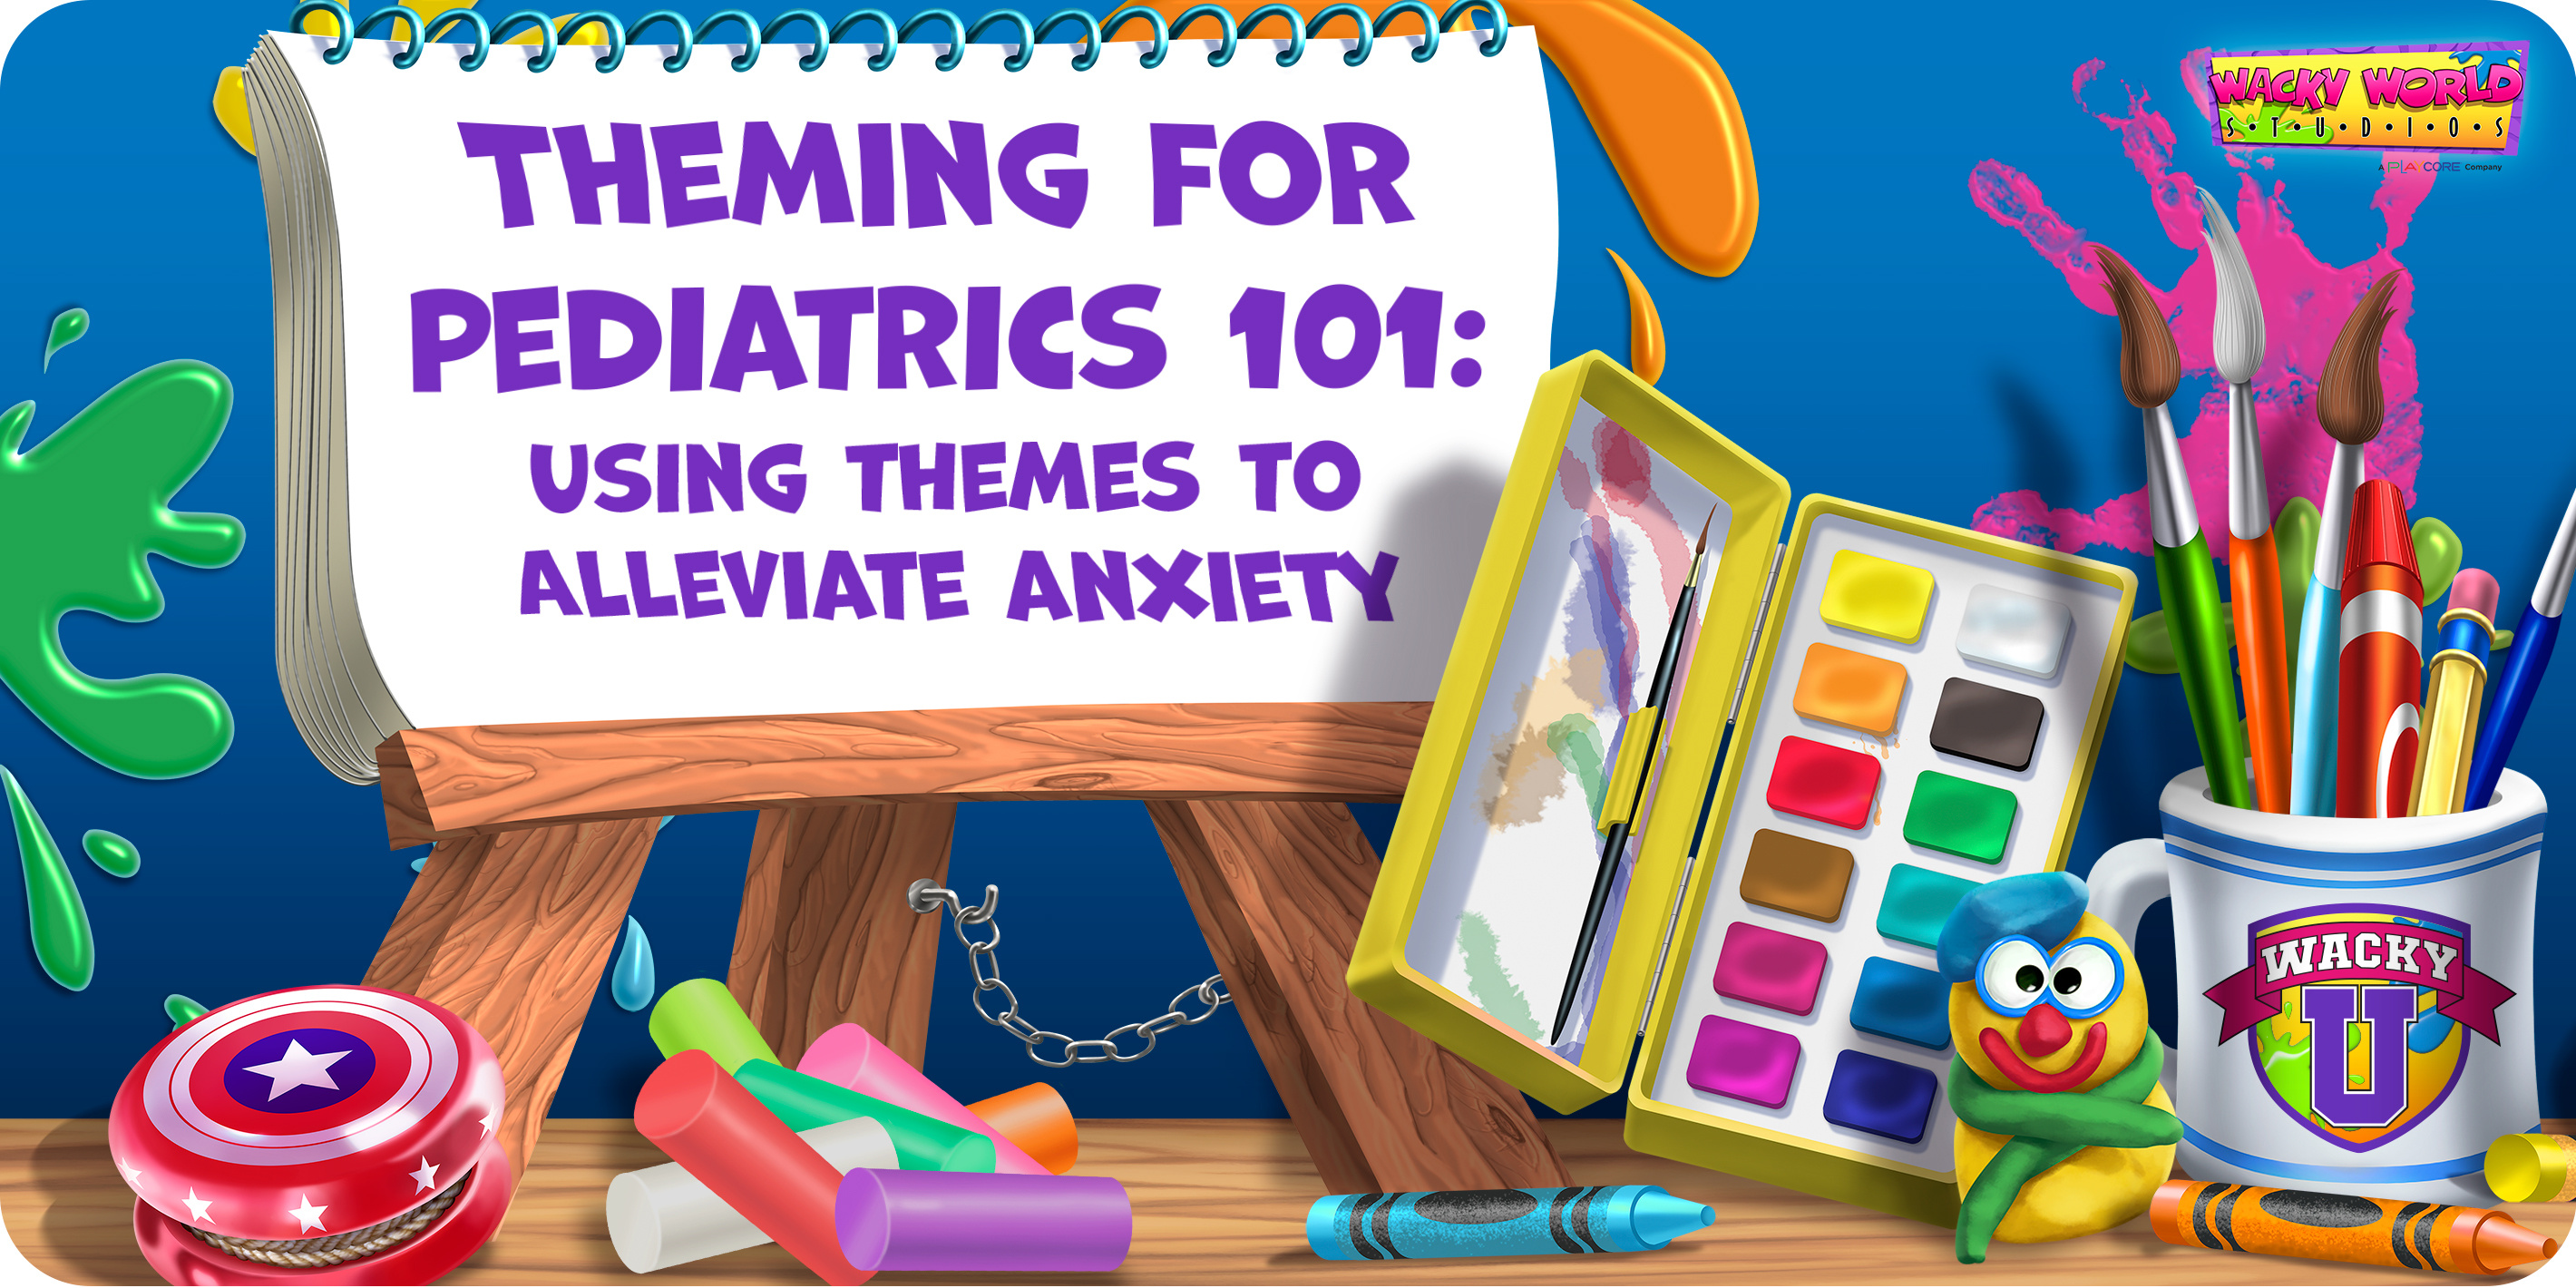 Using Themes to Alleviate Anxiety in Pediatric Patients